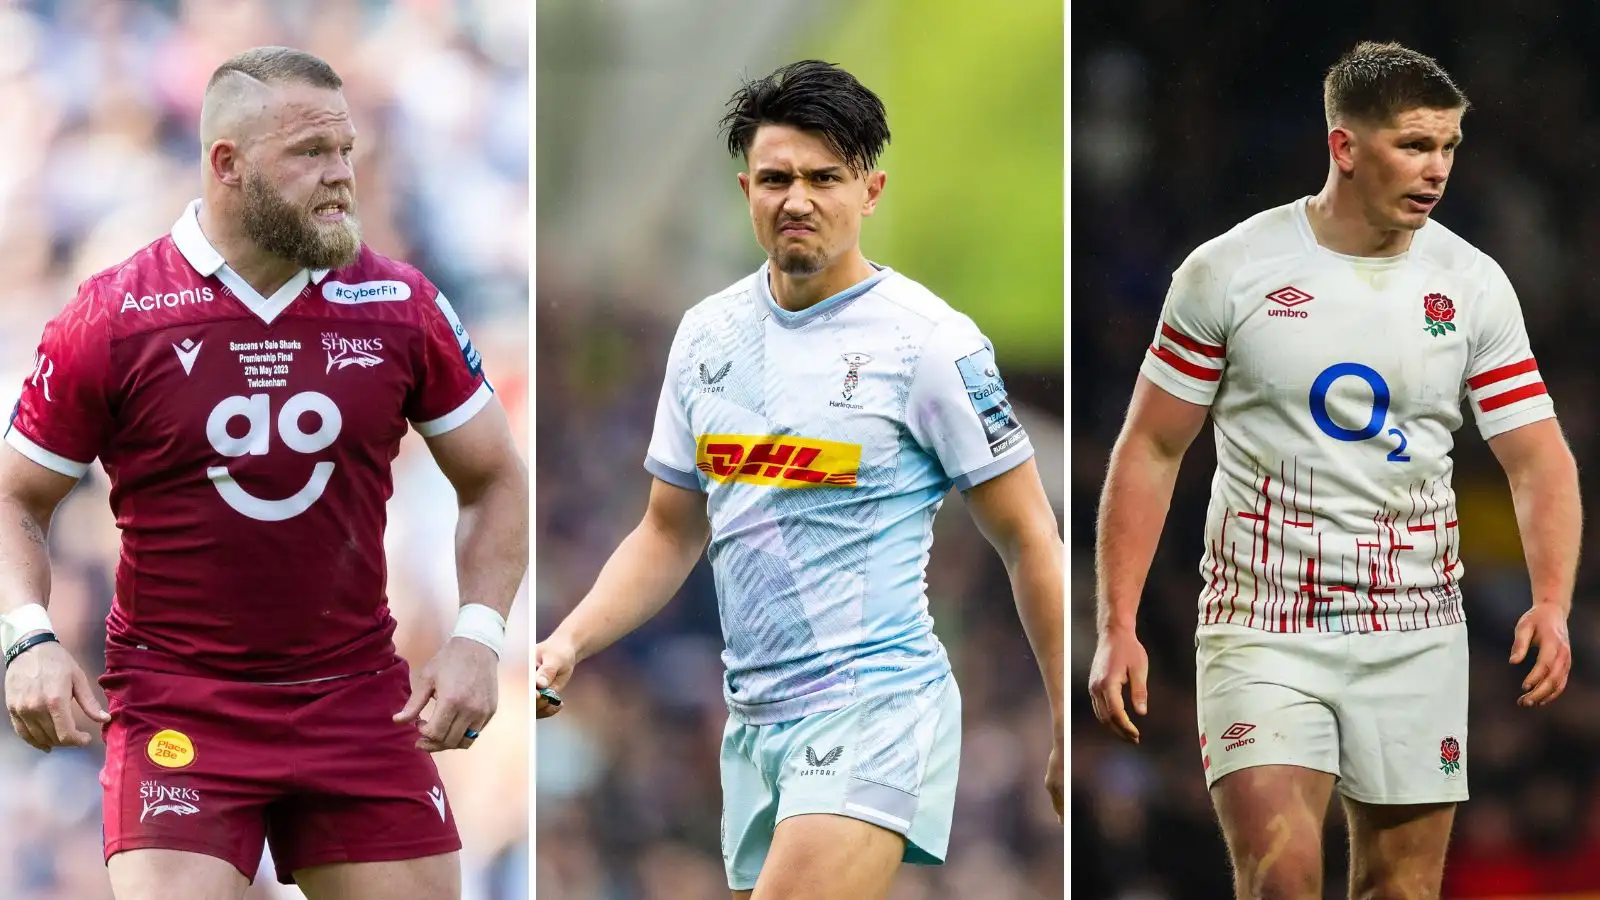 rugby rumours and transfers Sale Sharks' Akker van der Merwe, Harlequin's Marcus Smith and Owen Farrell